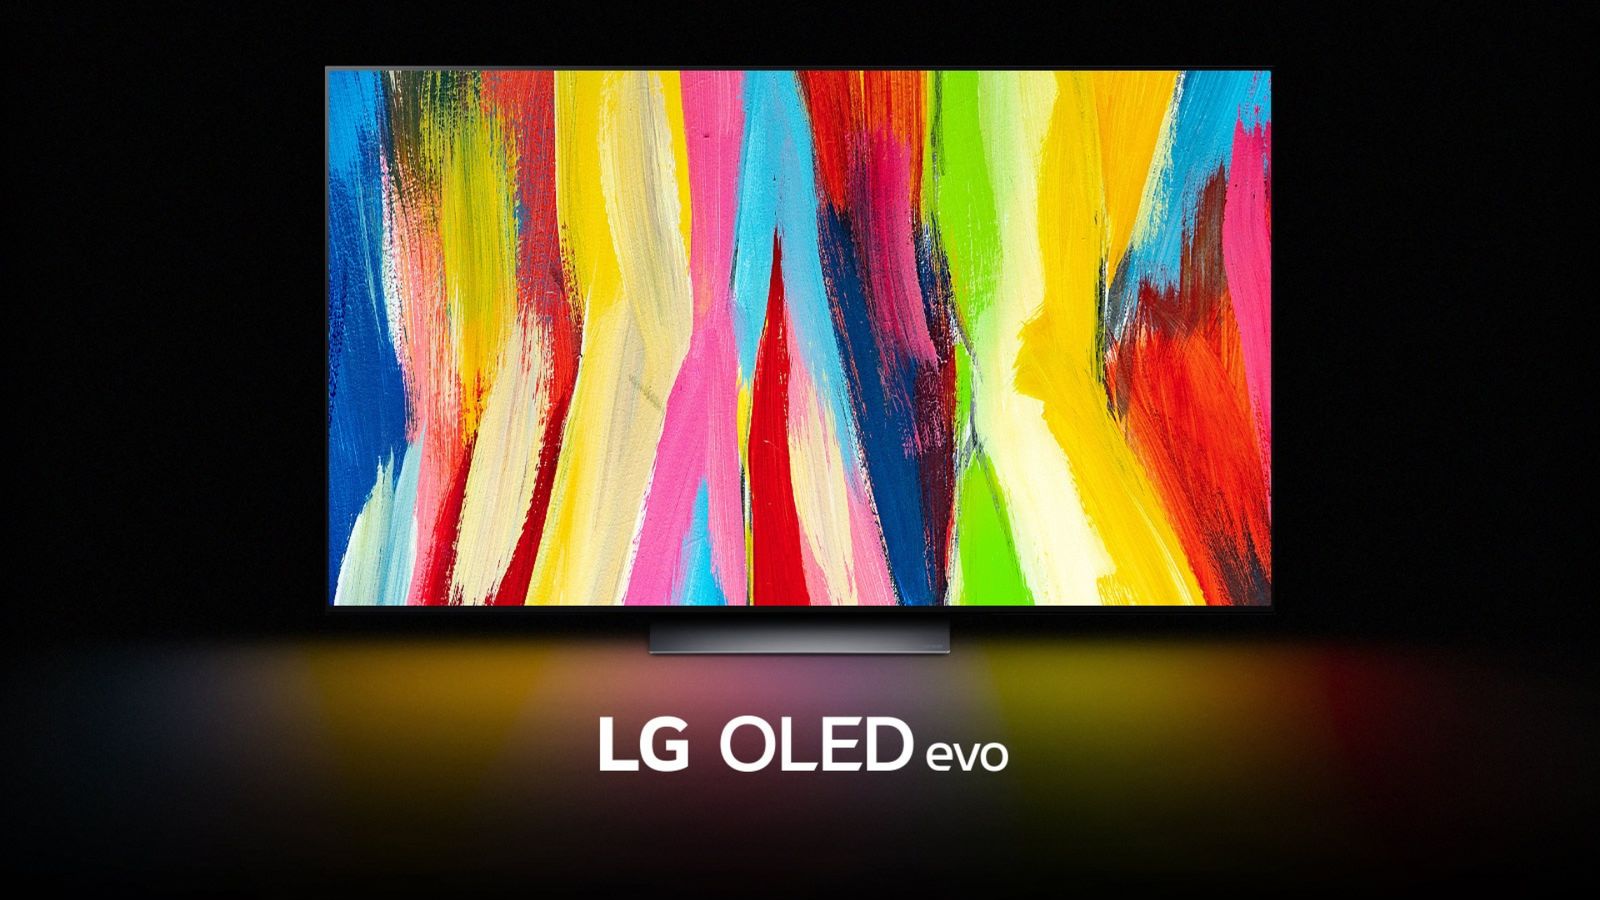 Image of a large flatscreen LG TV in a dark room featuring multicoloured streaks on the display.